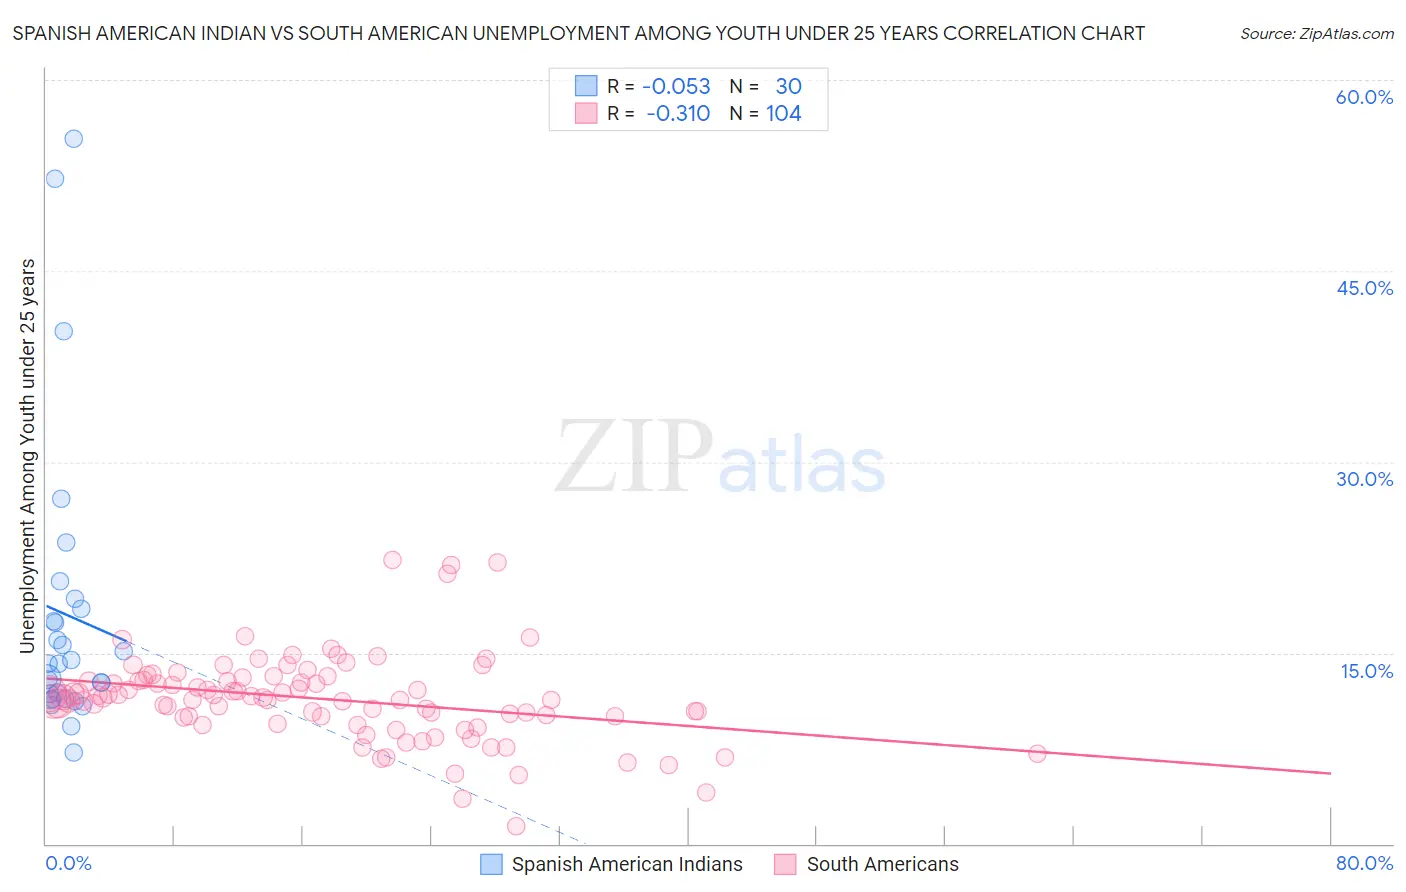 Spanish American Indian vs South American Unemployment Among Youth under 25 years